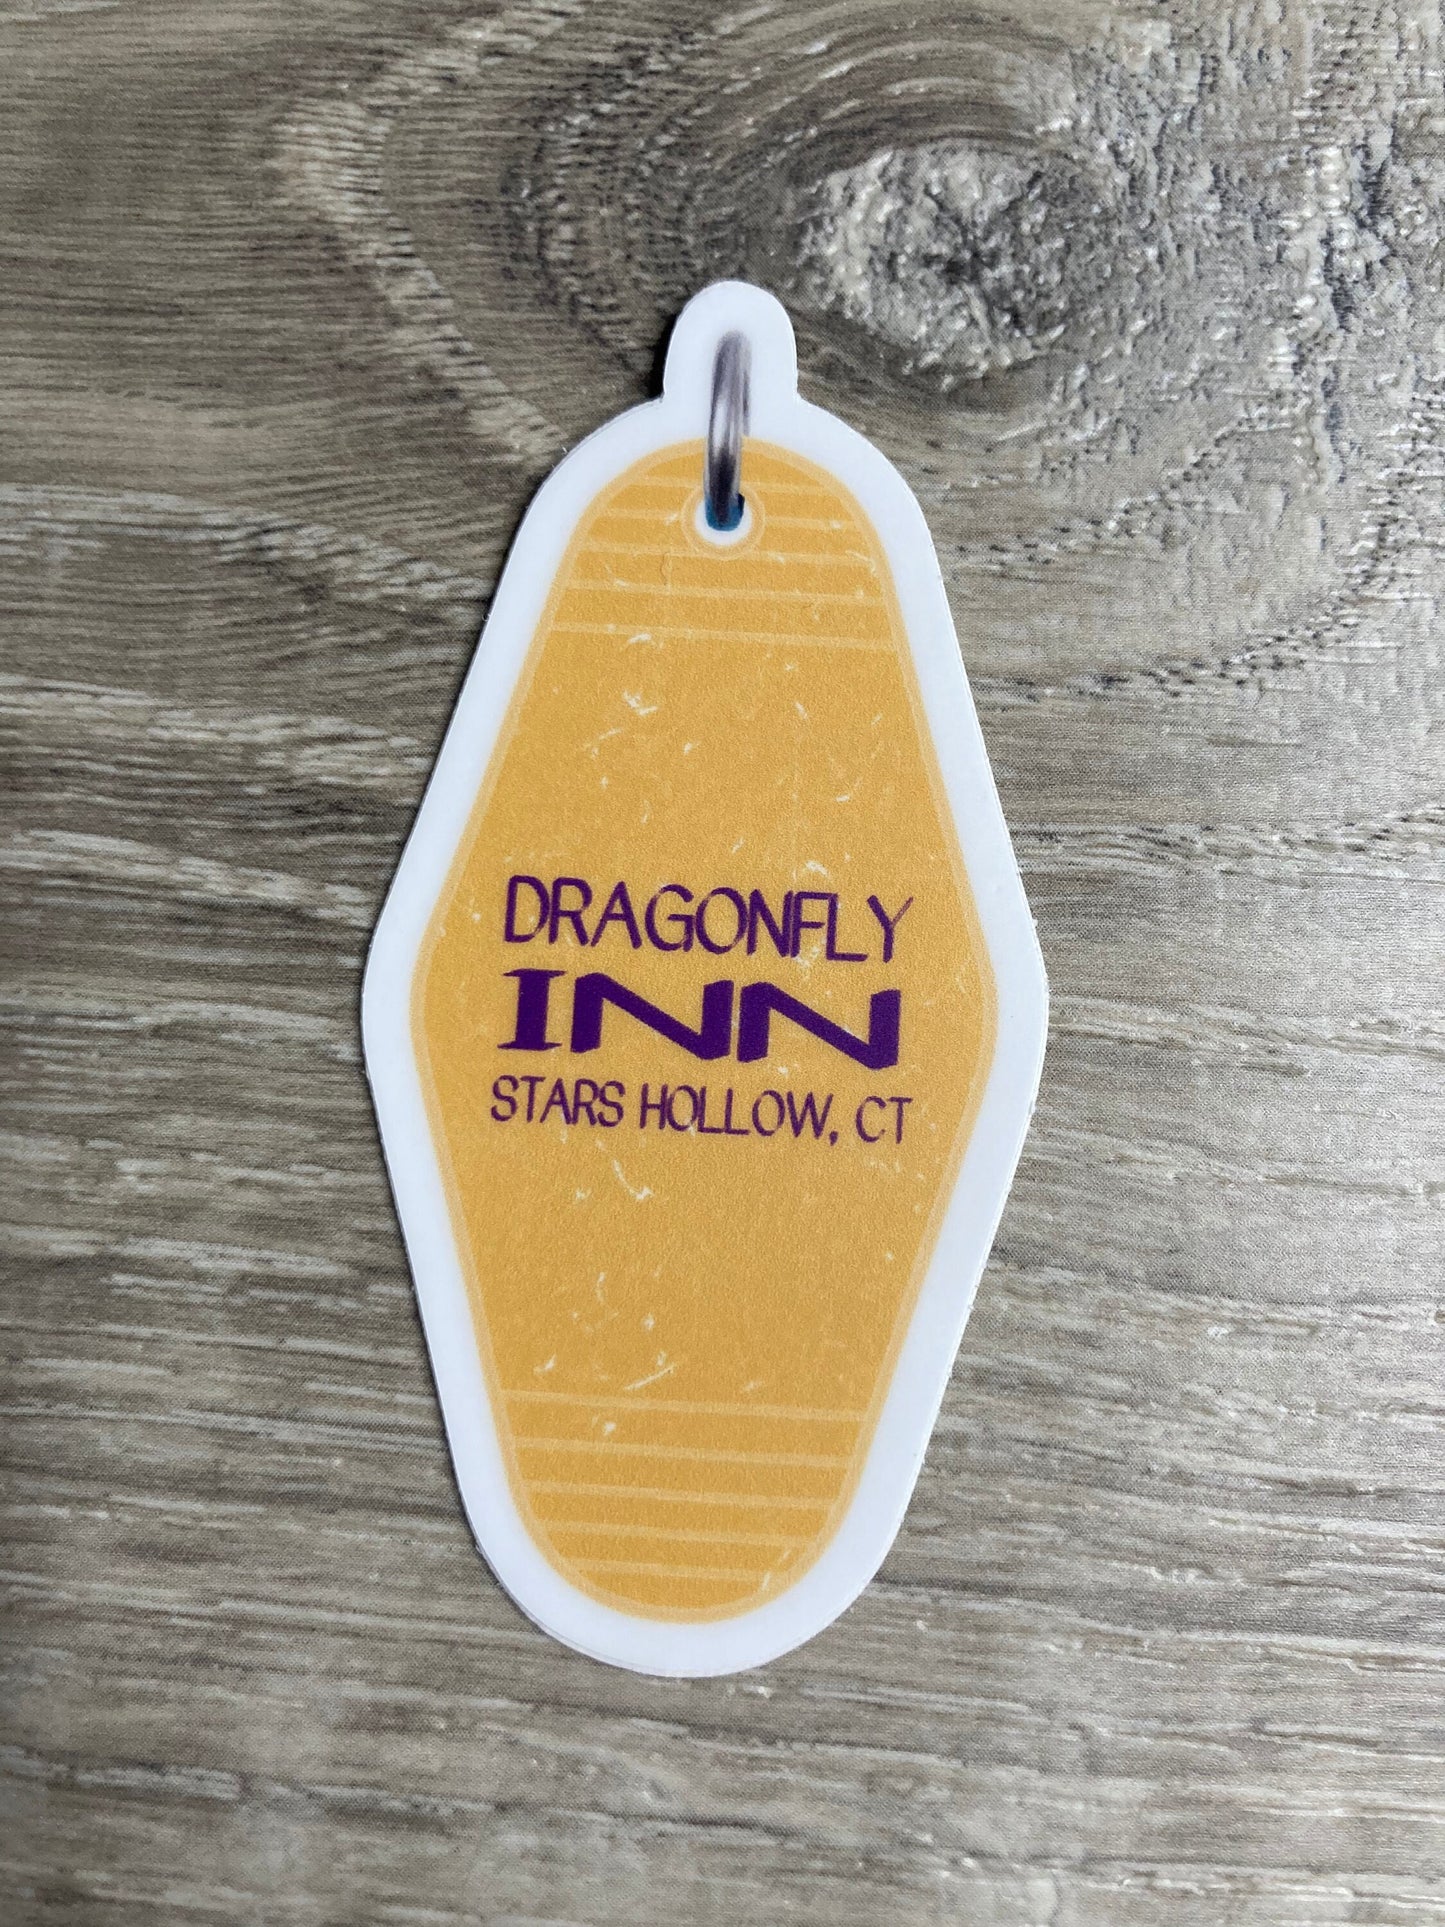 Gilmore Girls Inspired Dragonfly Inn Retro Key Fob Vinyl Sticker Live like Lorelei, Rory and Lorelei, Gifts for Her